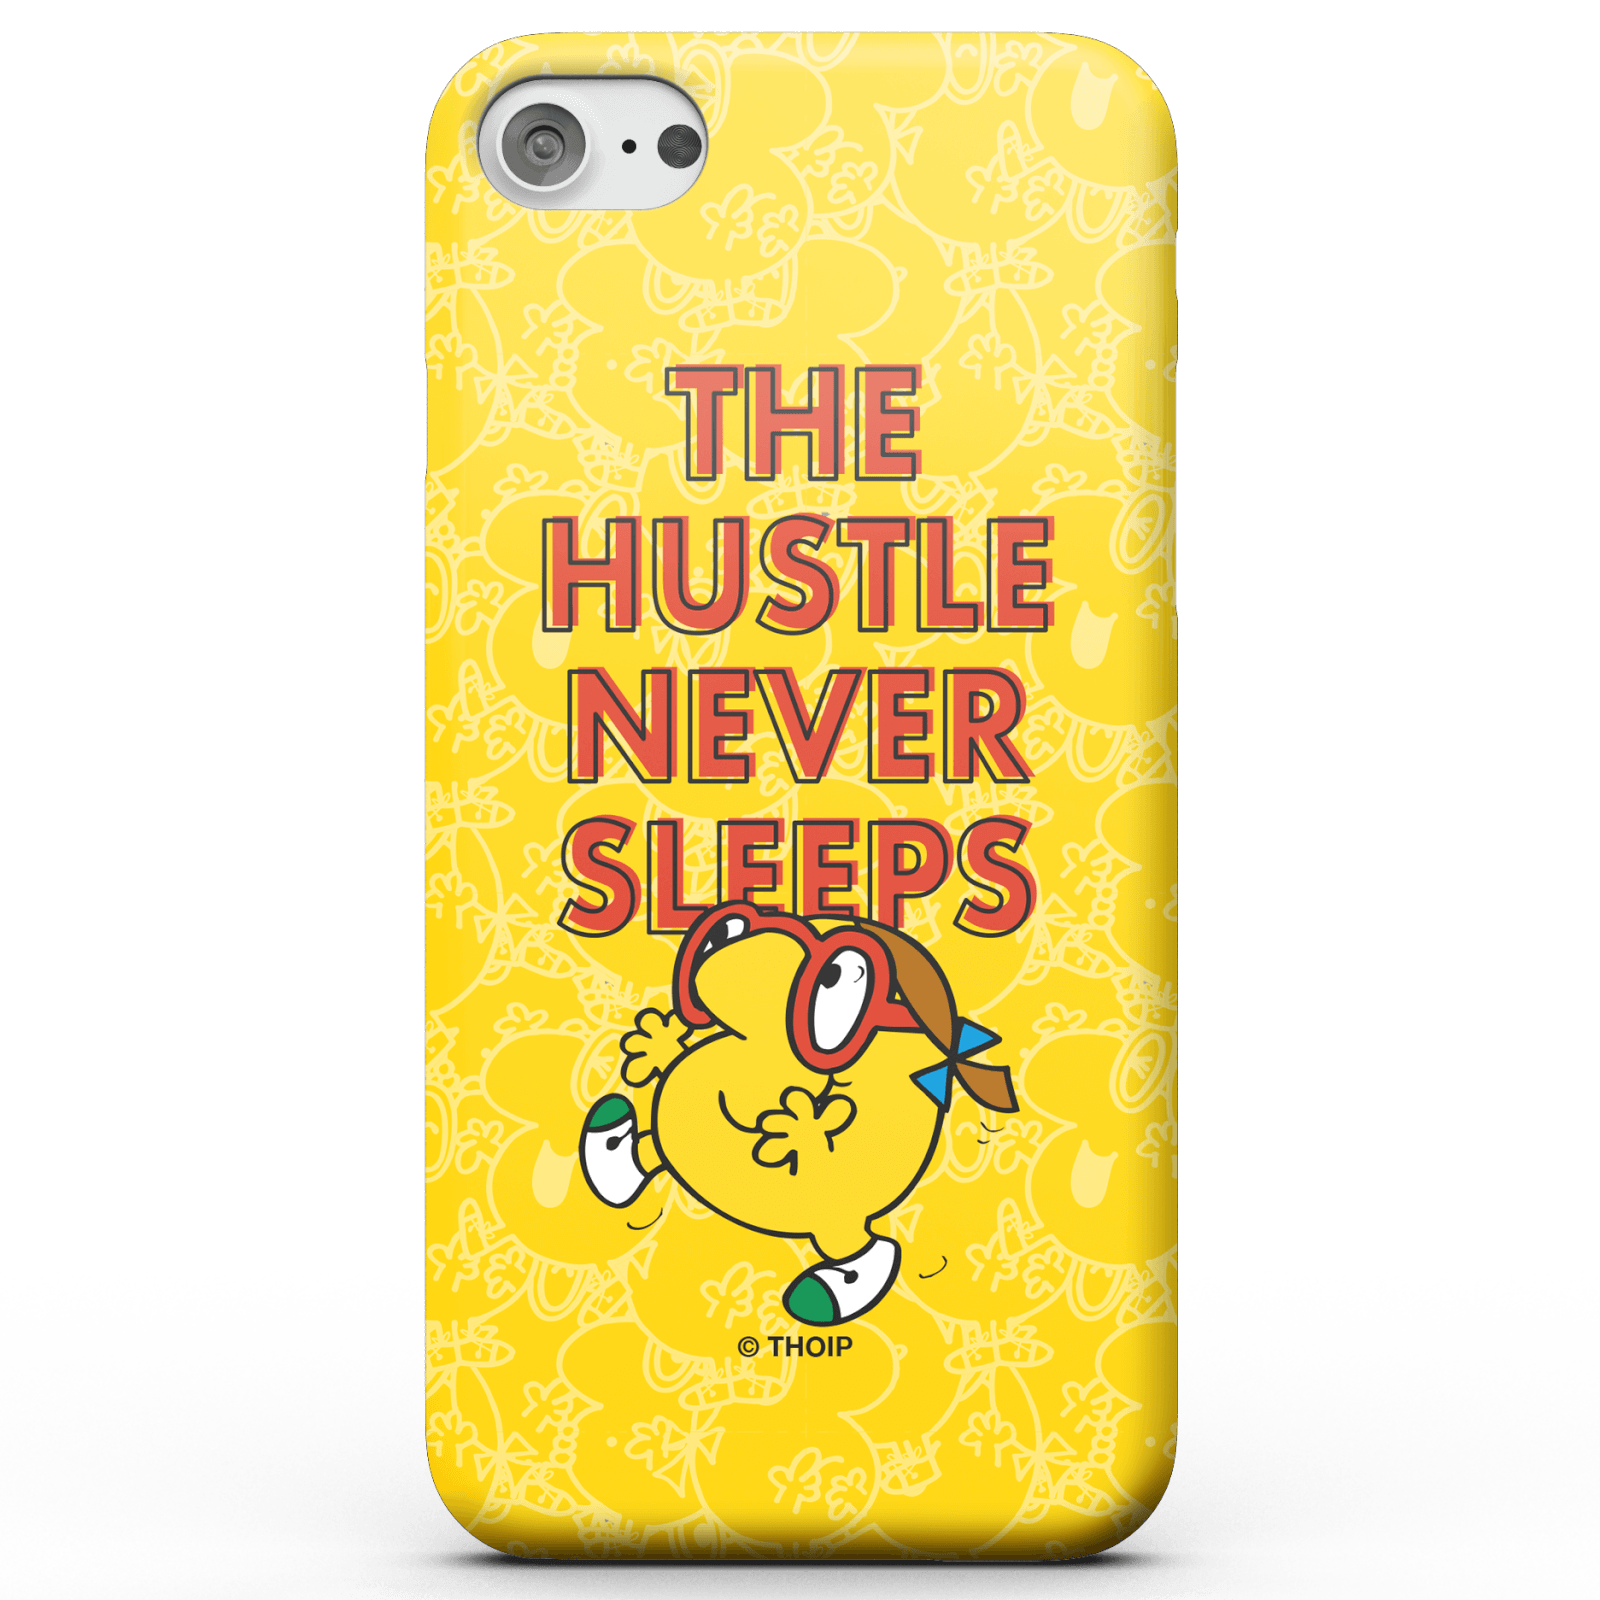 Mr Men & Little Miss Little Miss Busy The Hustle Never Sleeps Phone Case for iPhone and Android - iPhone 5/5s - Snap Case - Matte